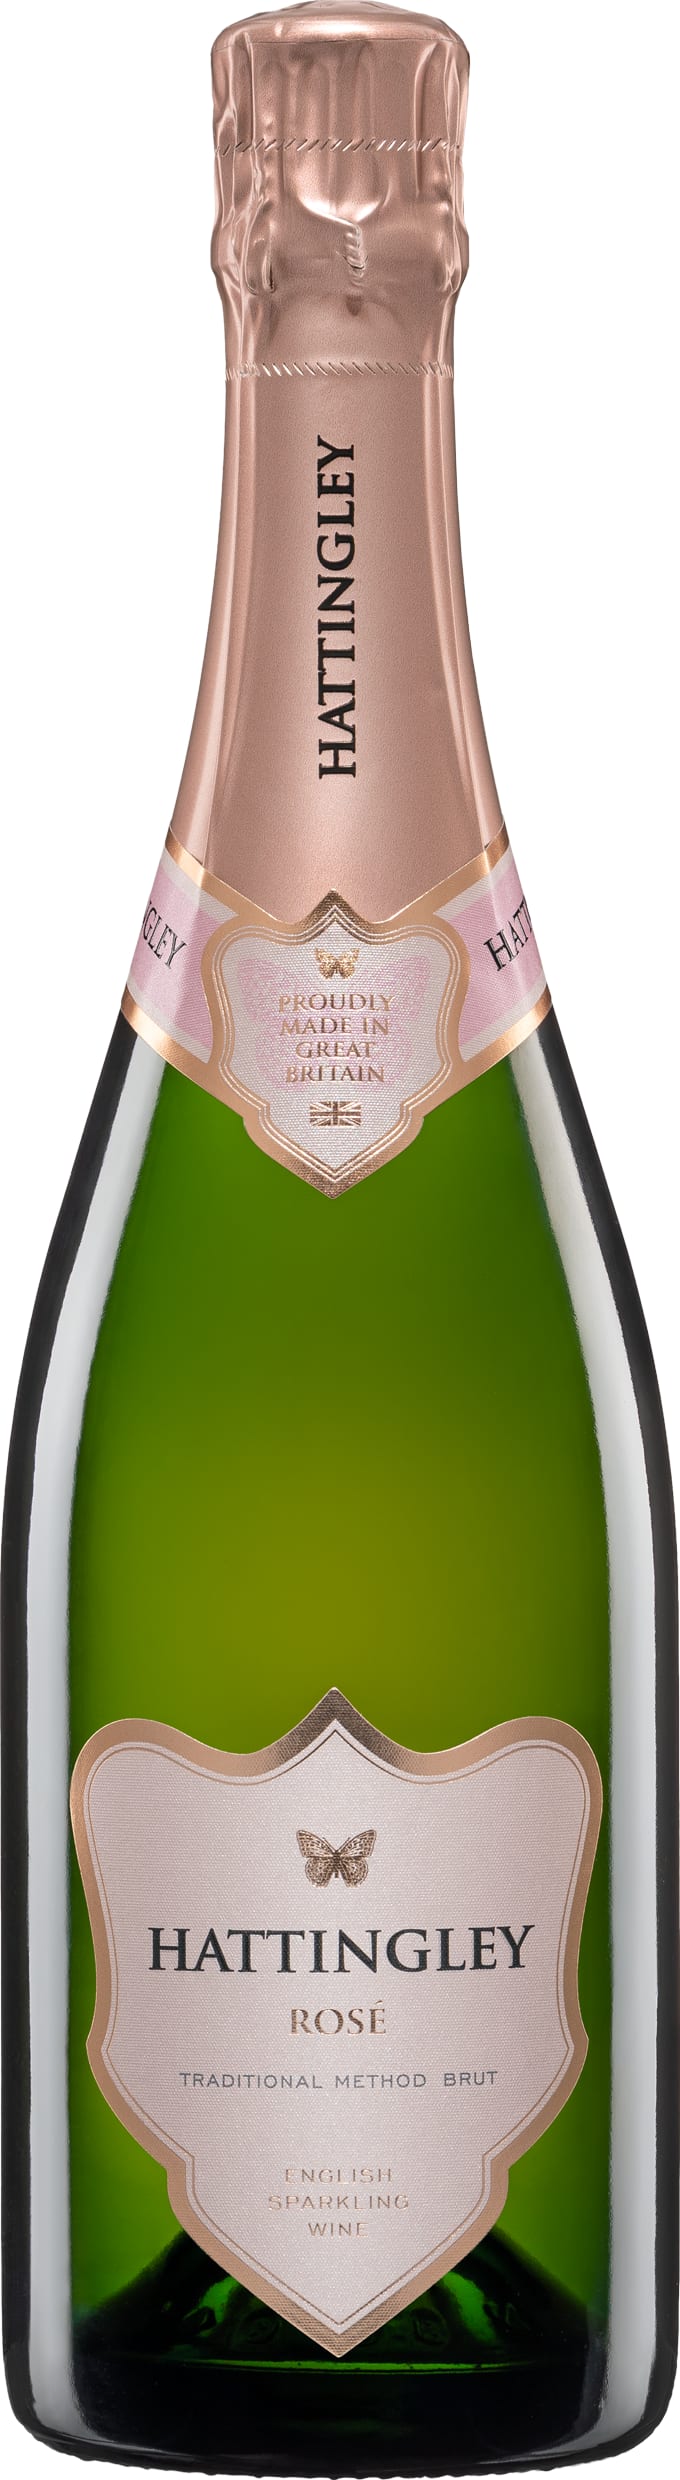 Hattingley Valley Rose Brut 2020 75cl - Buy Hattingley Valley Wines from GREAT WINES DIRECT wine shop